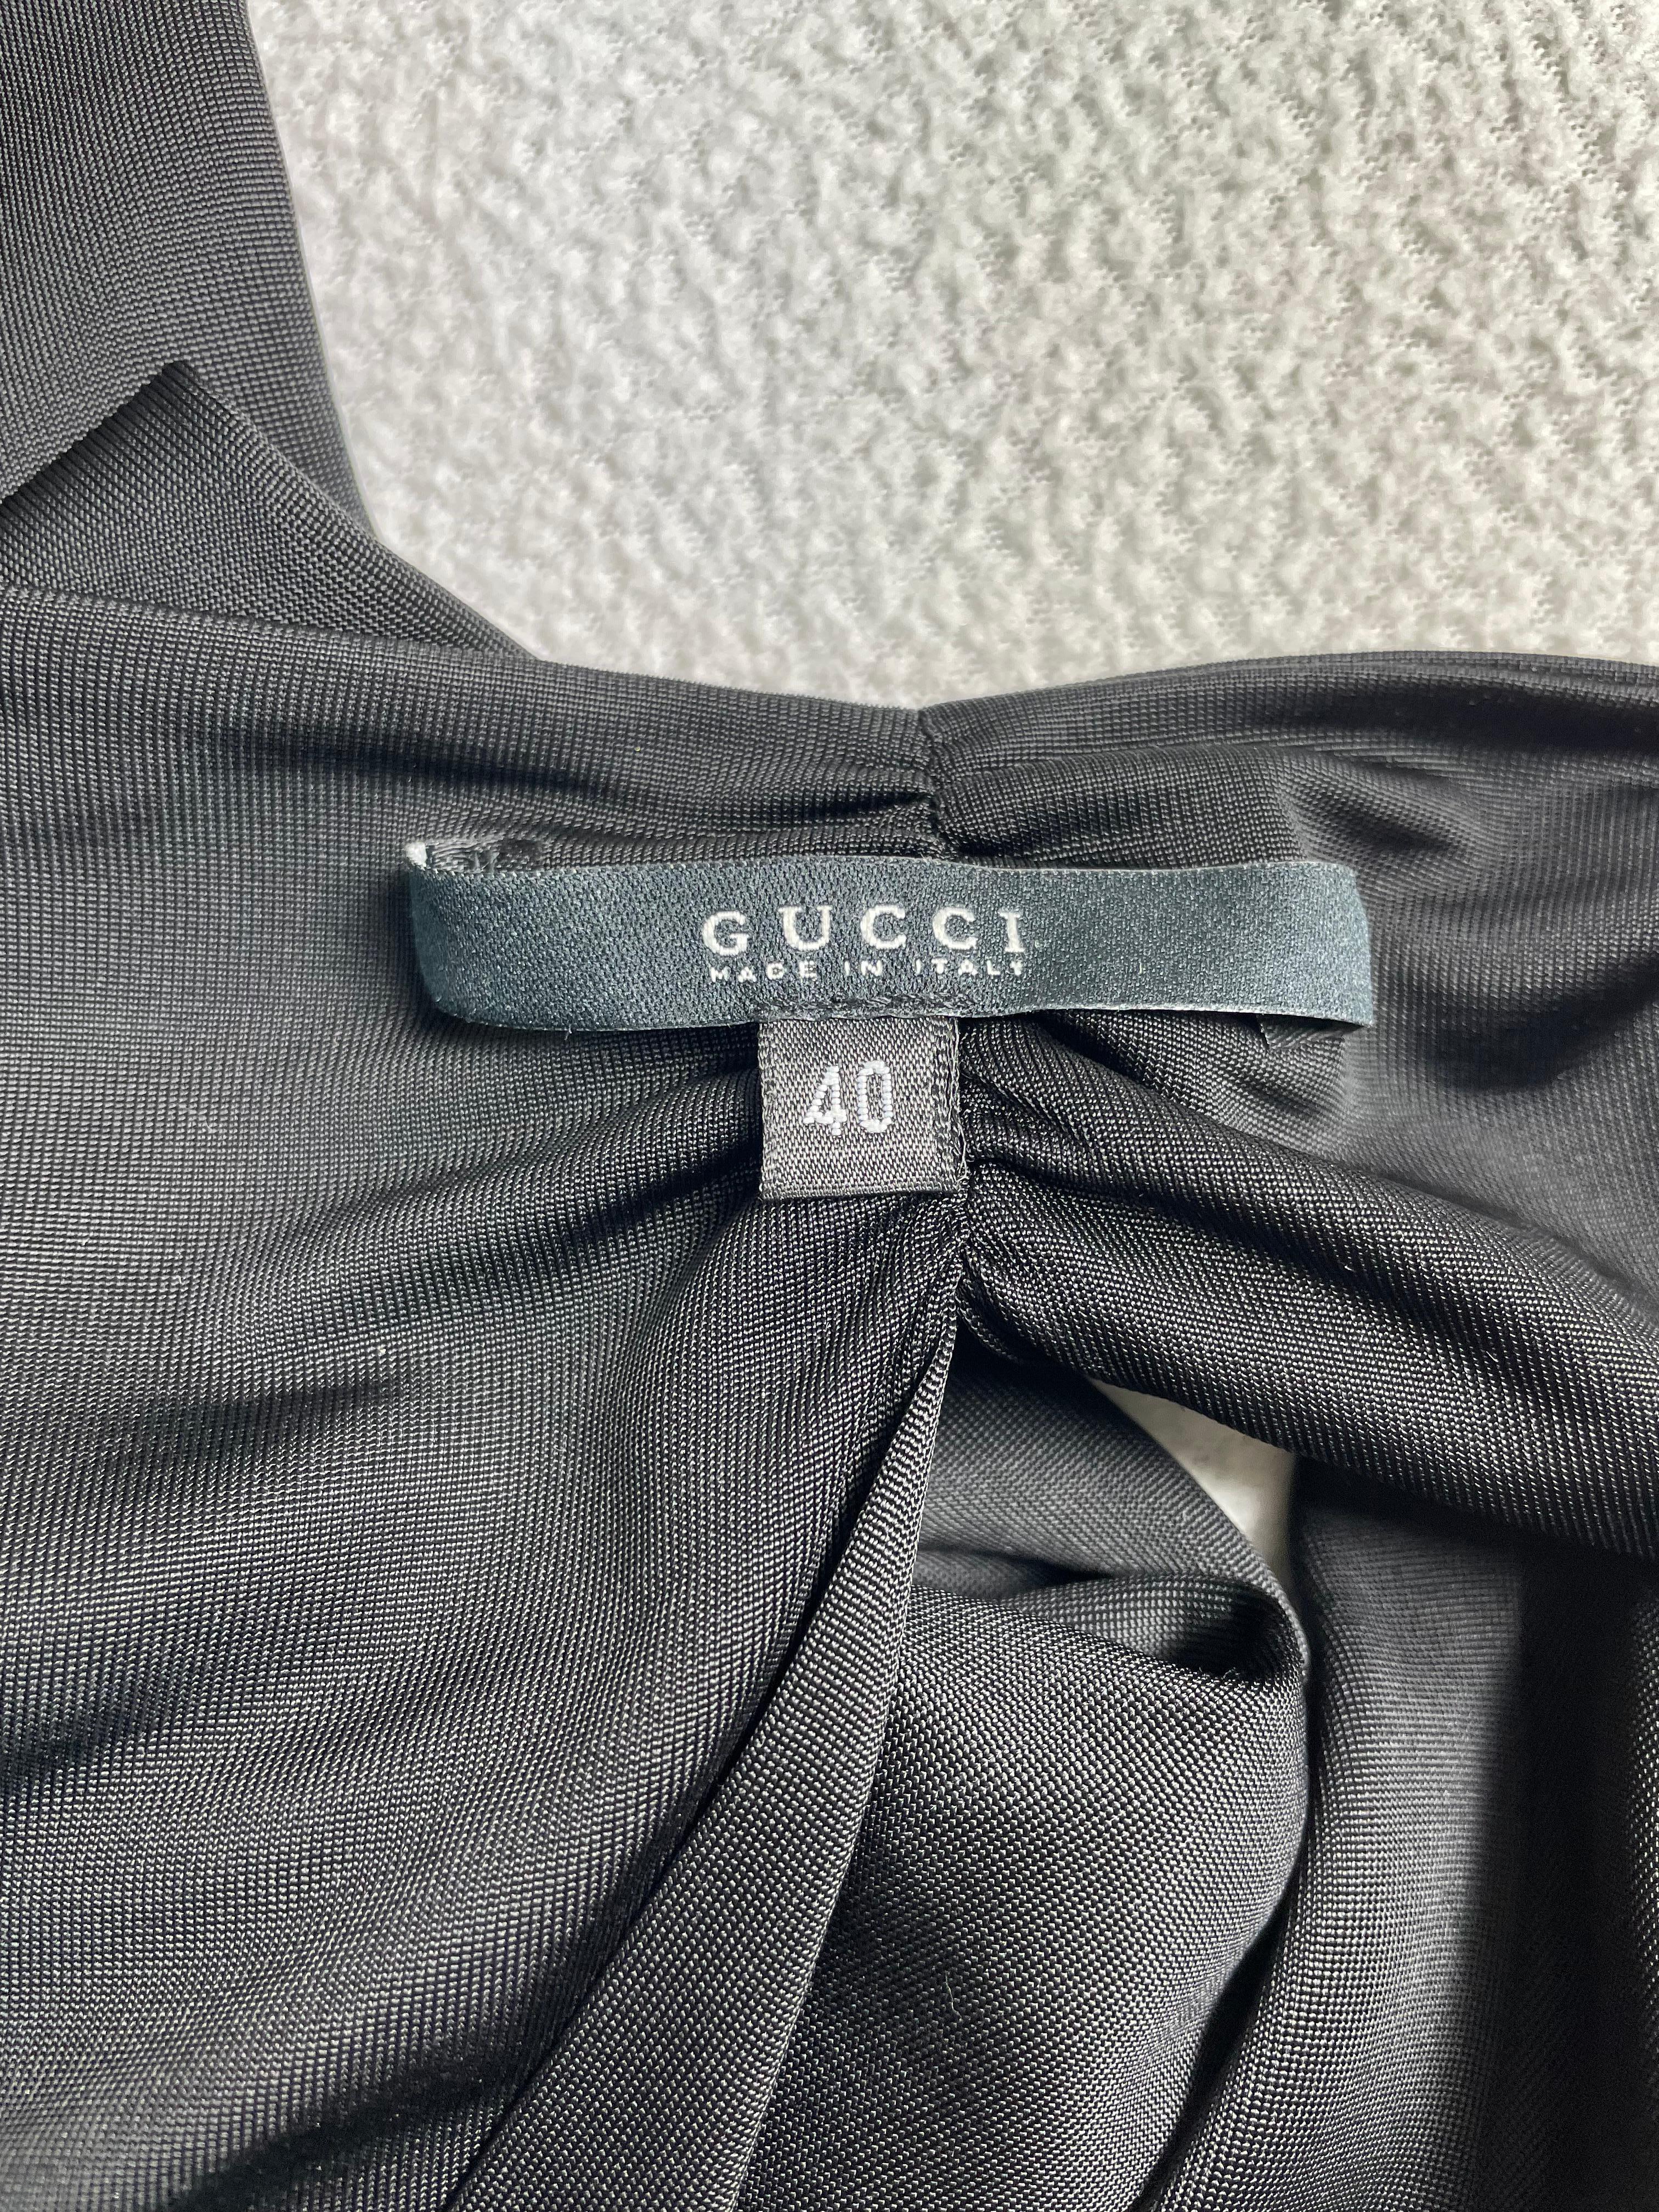 F/W 2004 Gucci by Tom Ford Runway Plunging Black Dragon Gown Dress In Good Condition In Yukon, OK